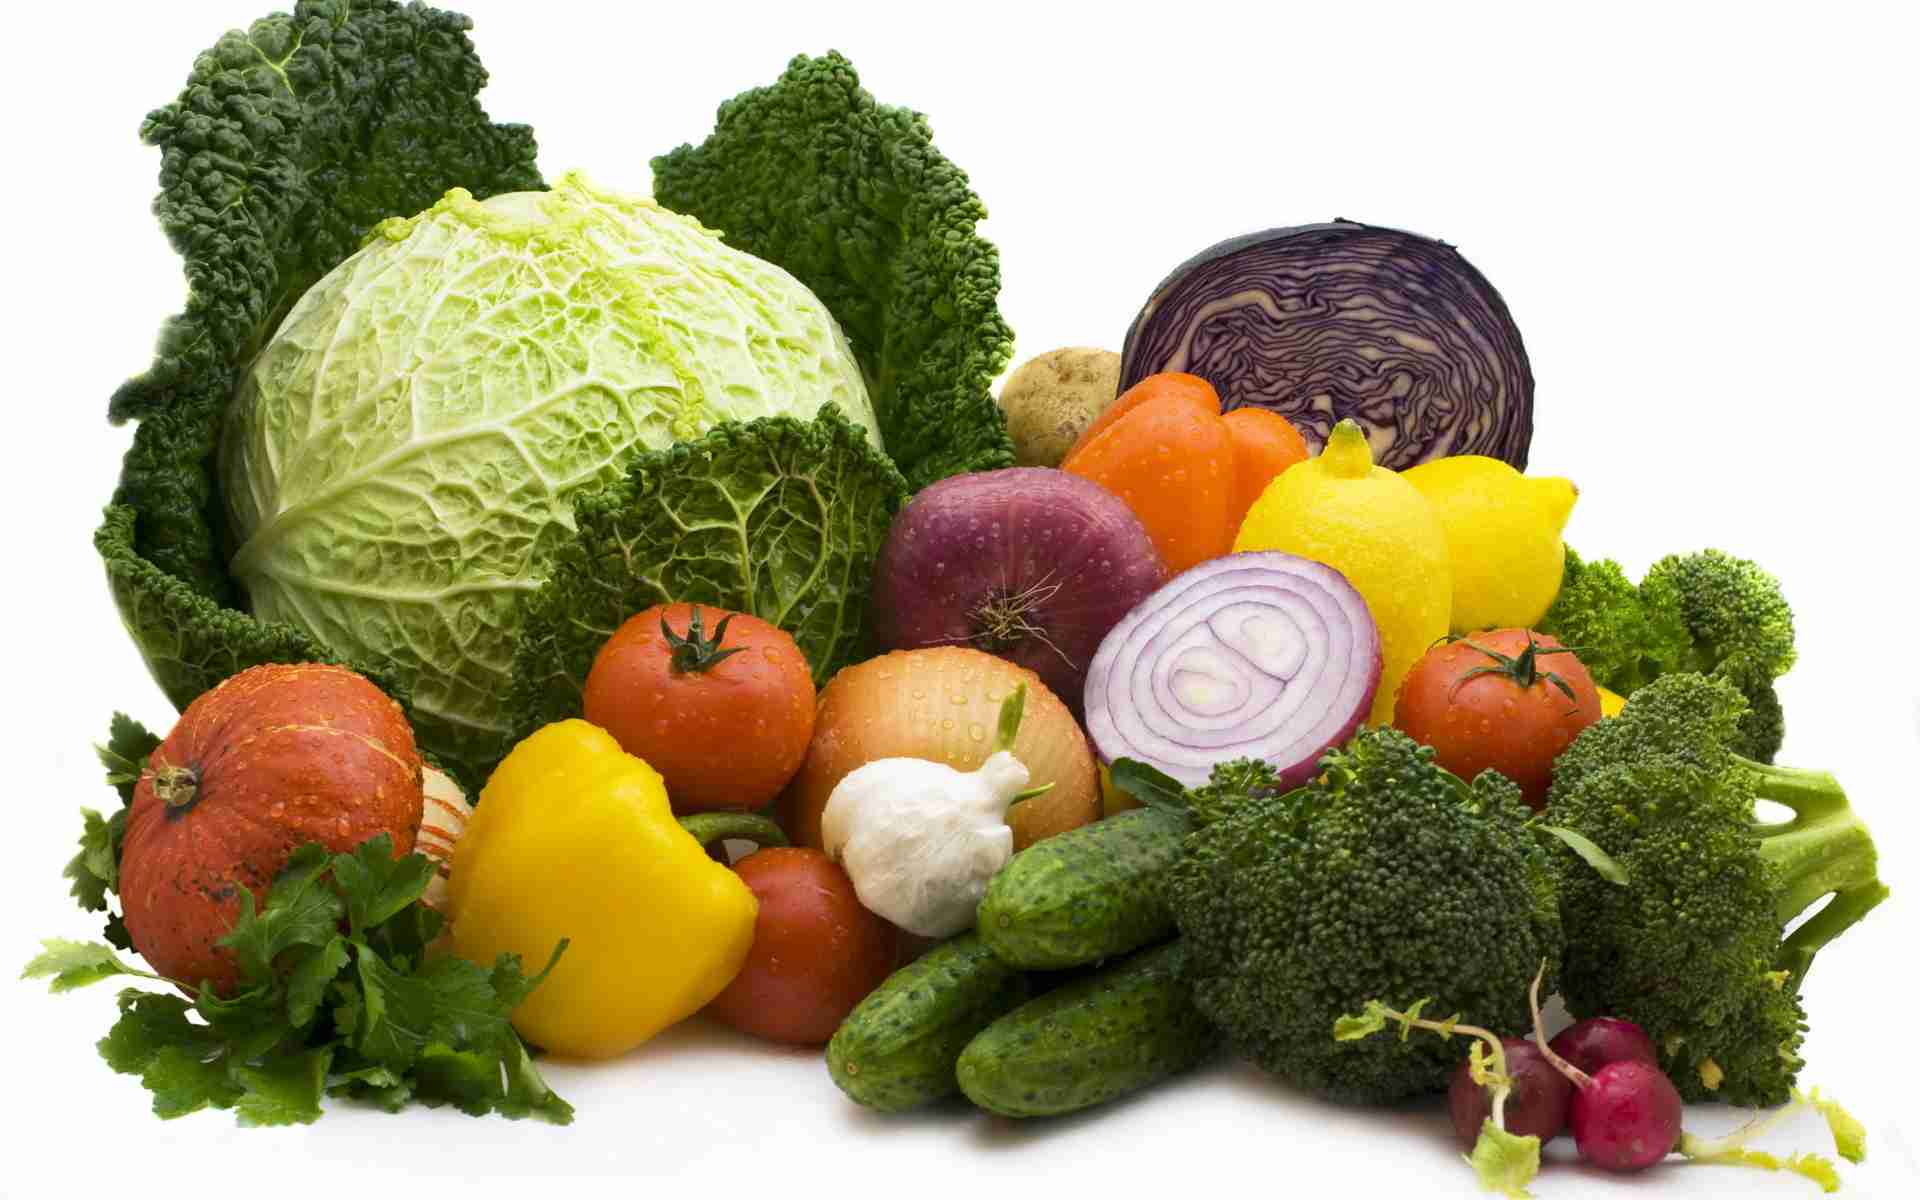 Garhwa vegetables and fruits - Profile Image